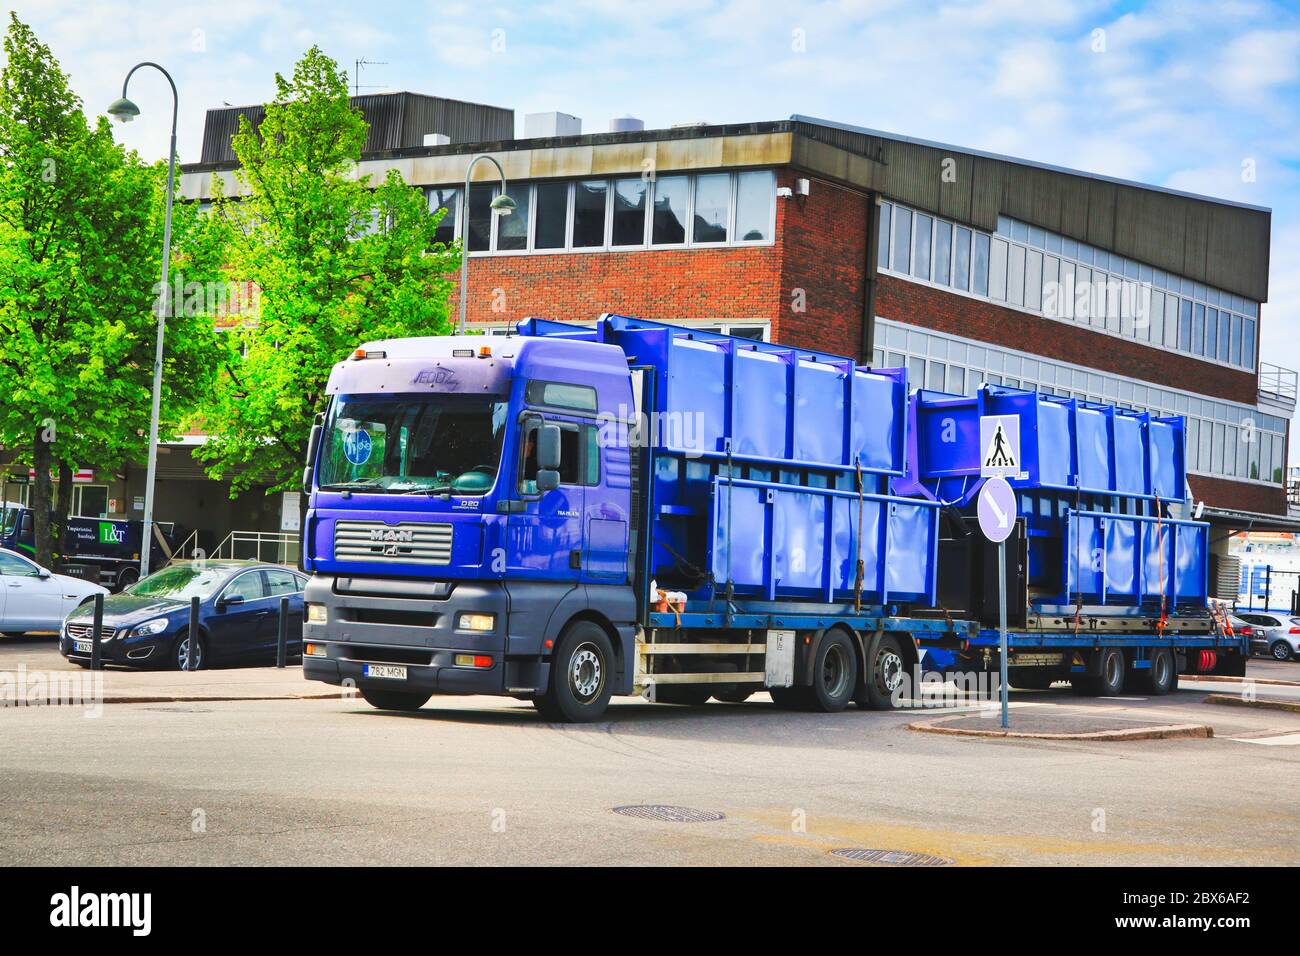 Blue MAN TGA truck transports a load of dumpsters on trailer, exits Port of Helsinki, Finland. May 3, 2020. Stock Photo